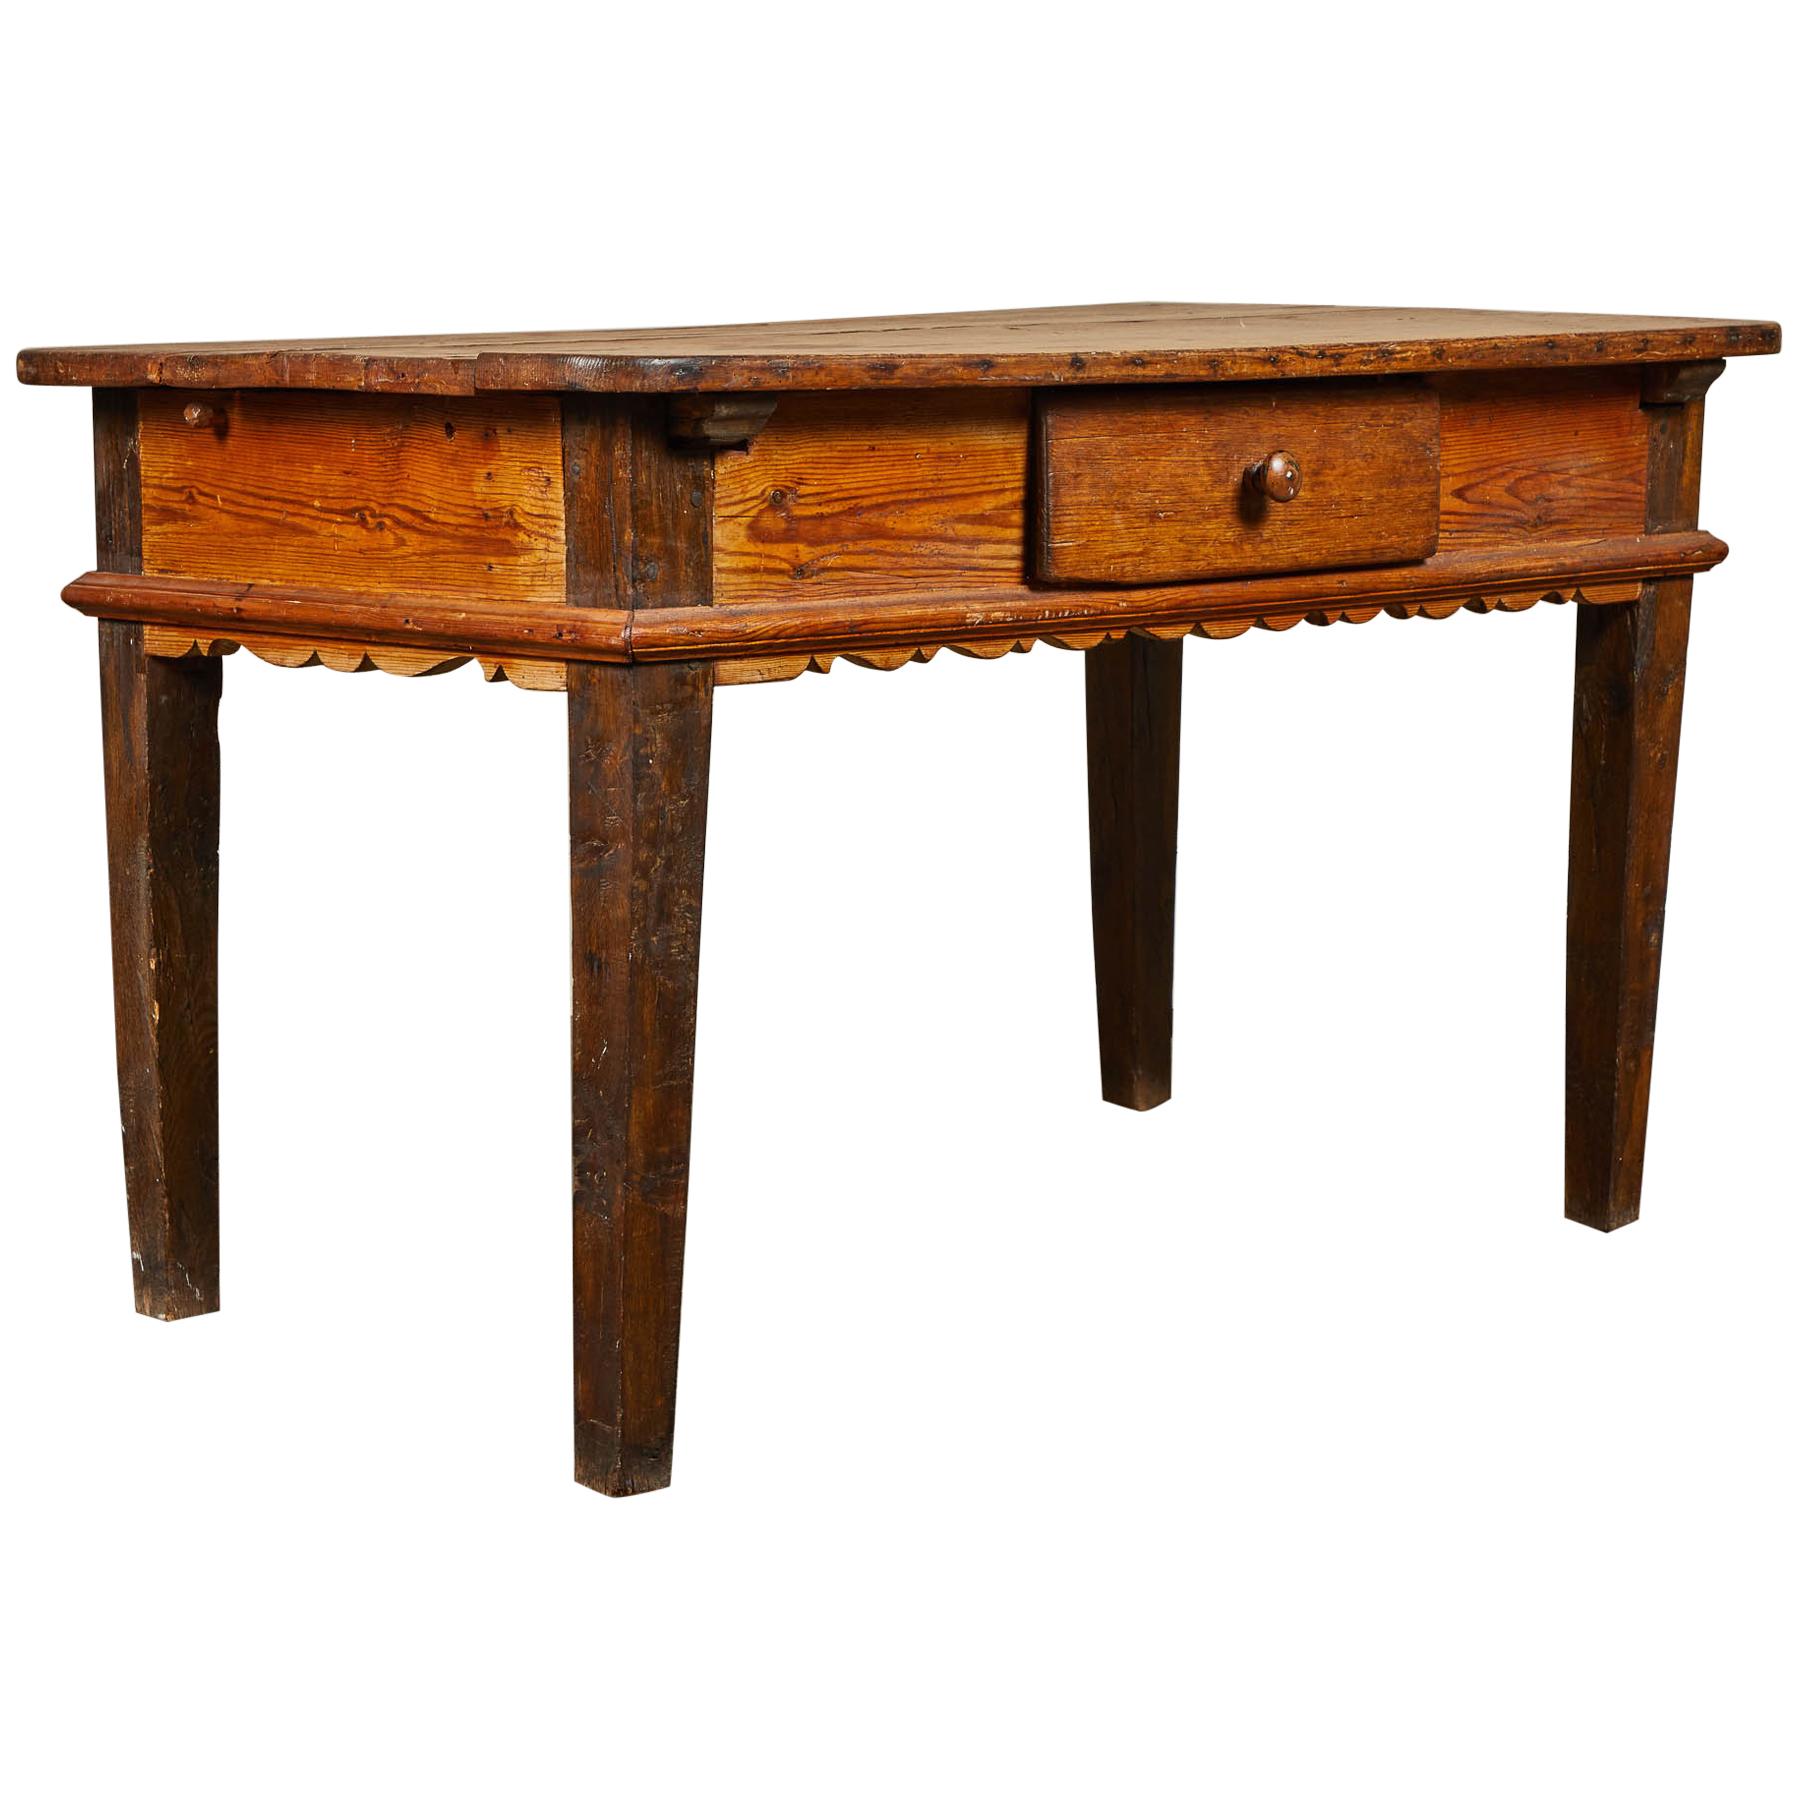 Early 19th Century French Baroque Pine and Oak Table